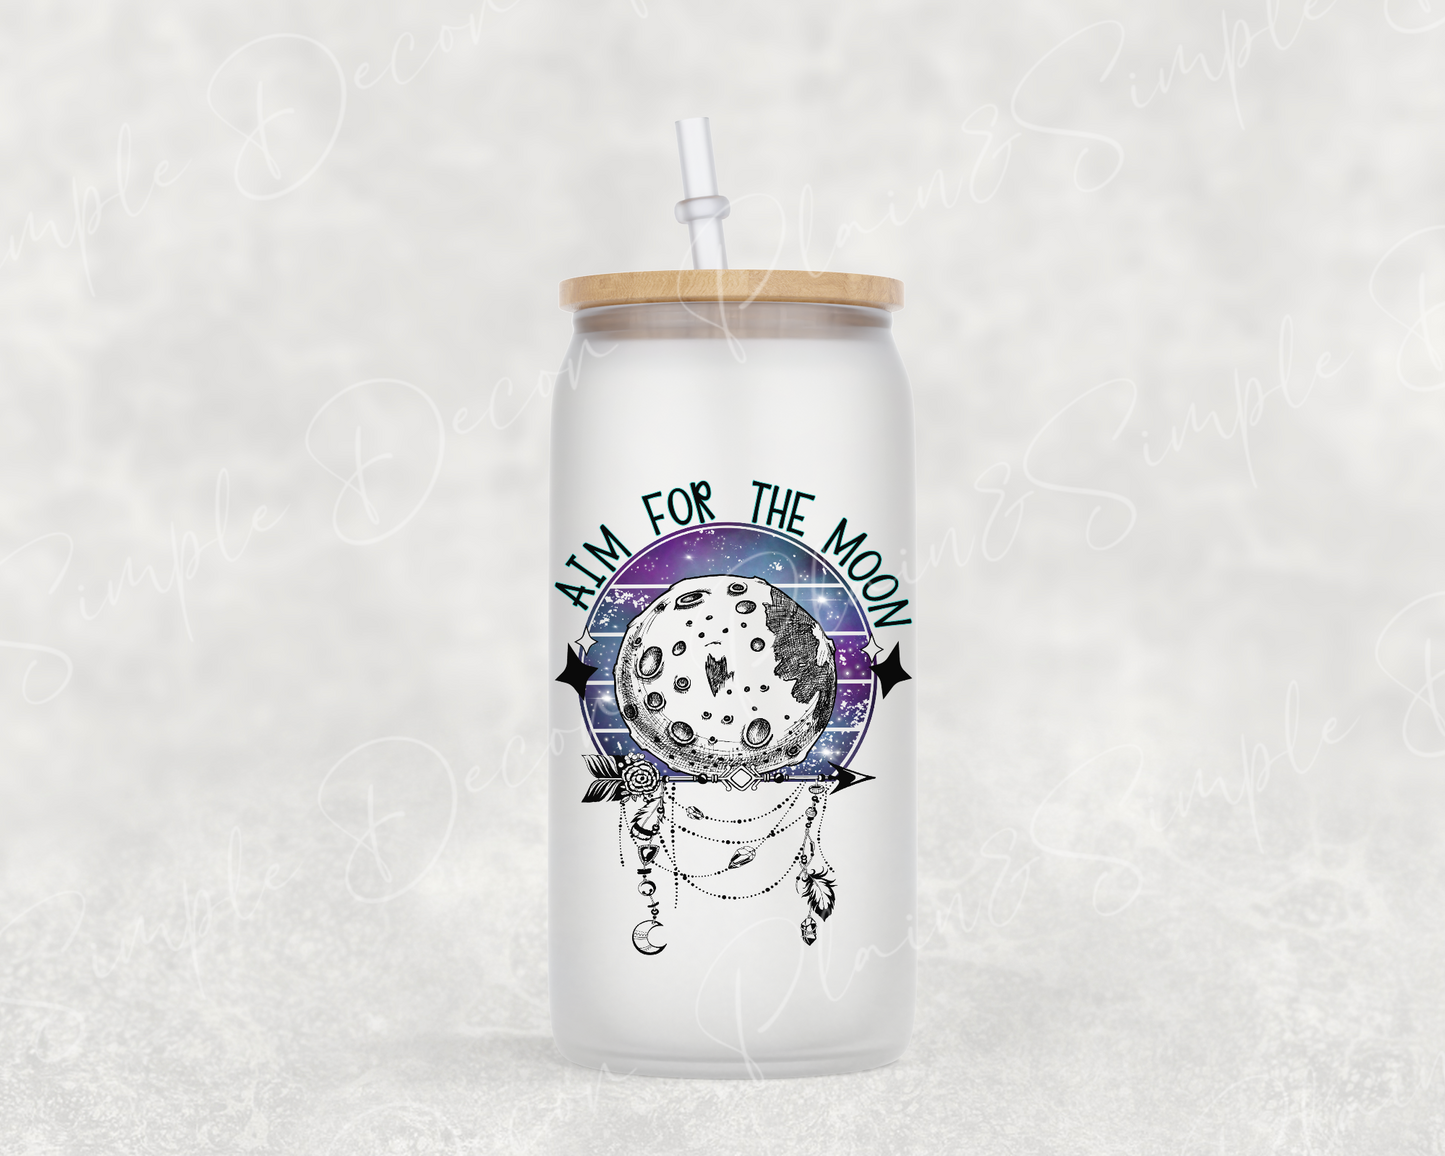 Aim For The Moon - 16 oz Frosted Mason Jar